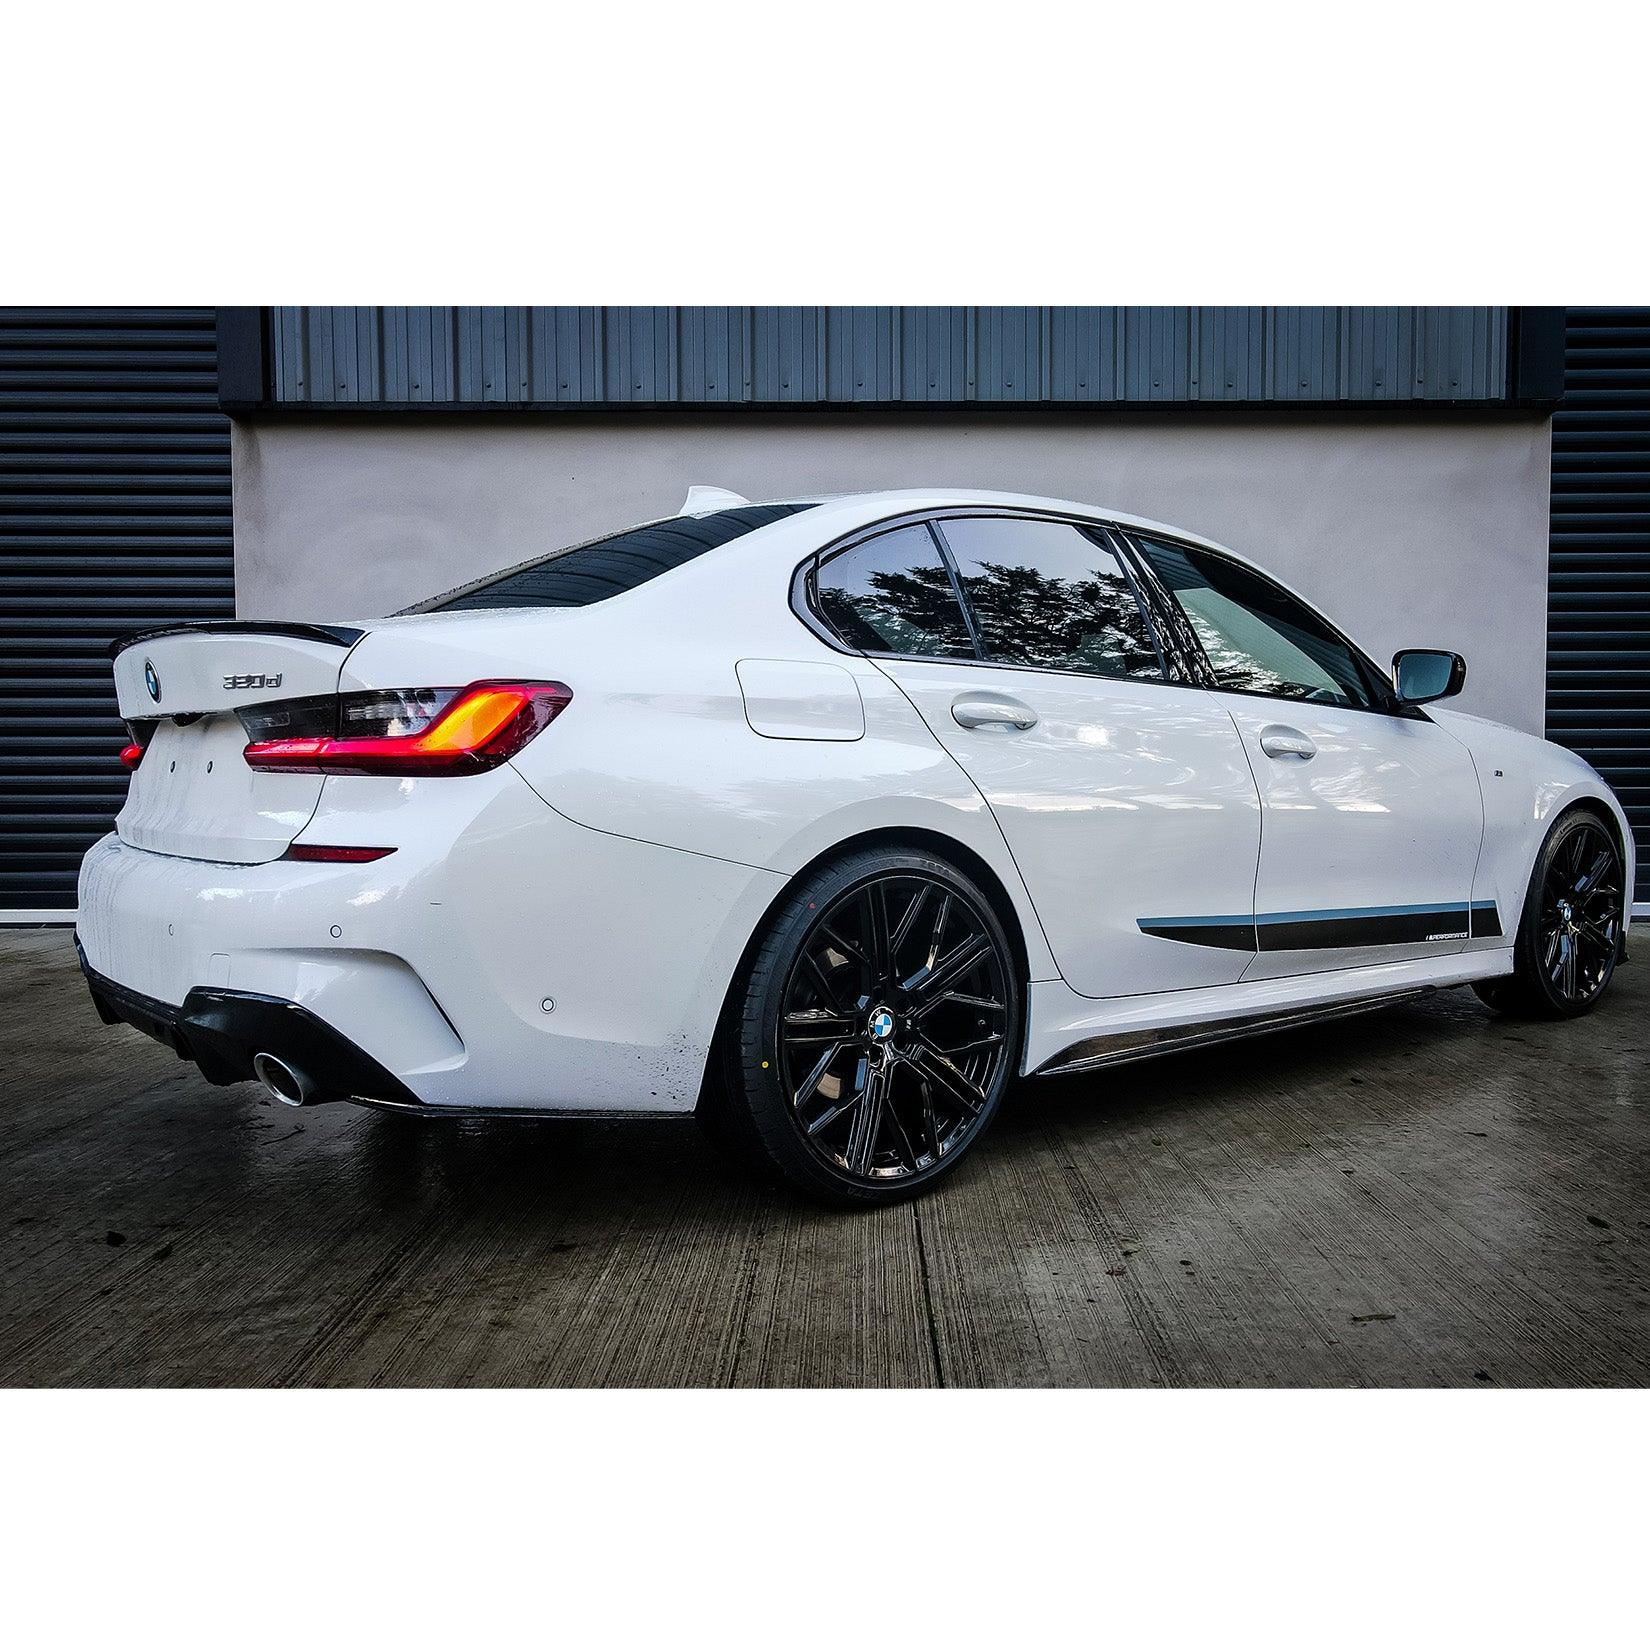 BMW 3 SERIES G20/G28 2018 ON REAR SPATS EXTENSTIONS FOR M SPORT BUMPER IN GLOSS BLACK - RisperStyling